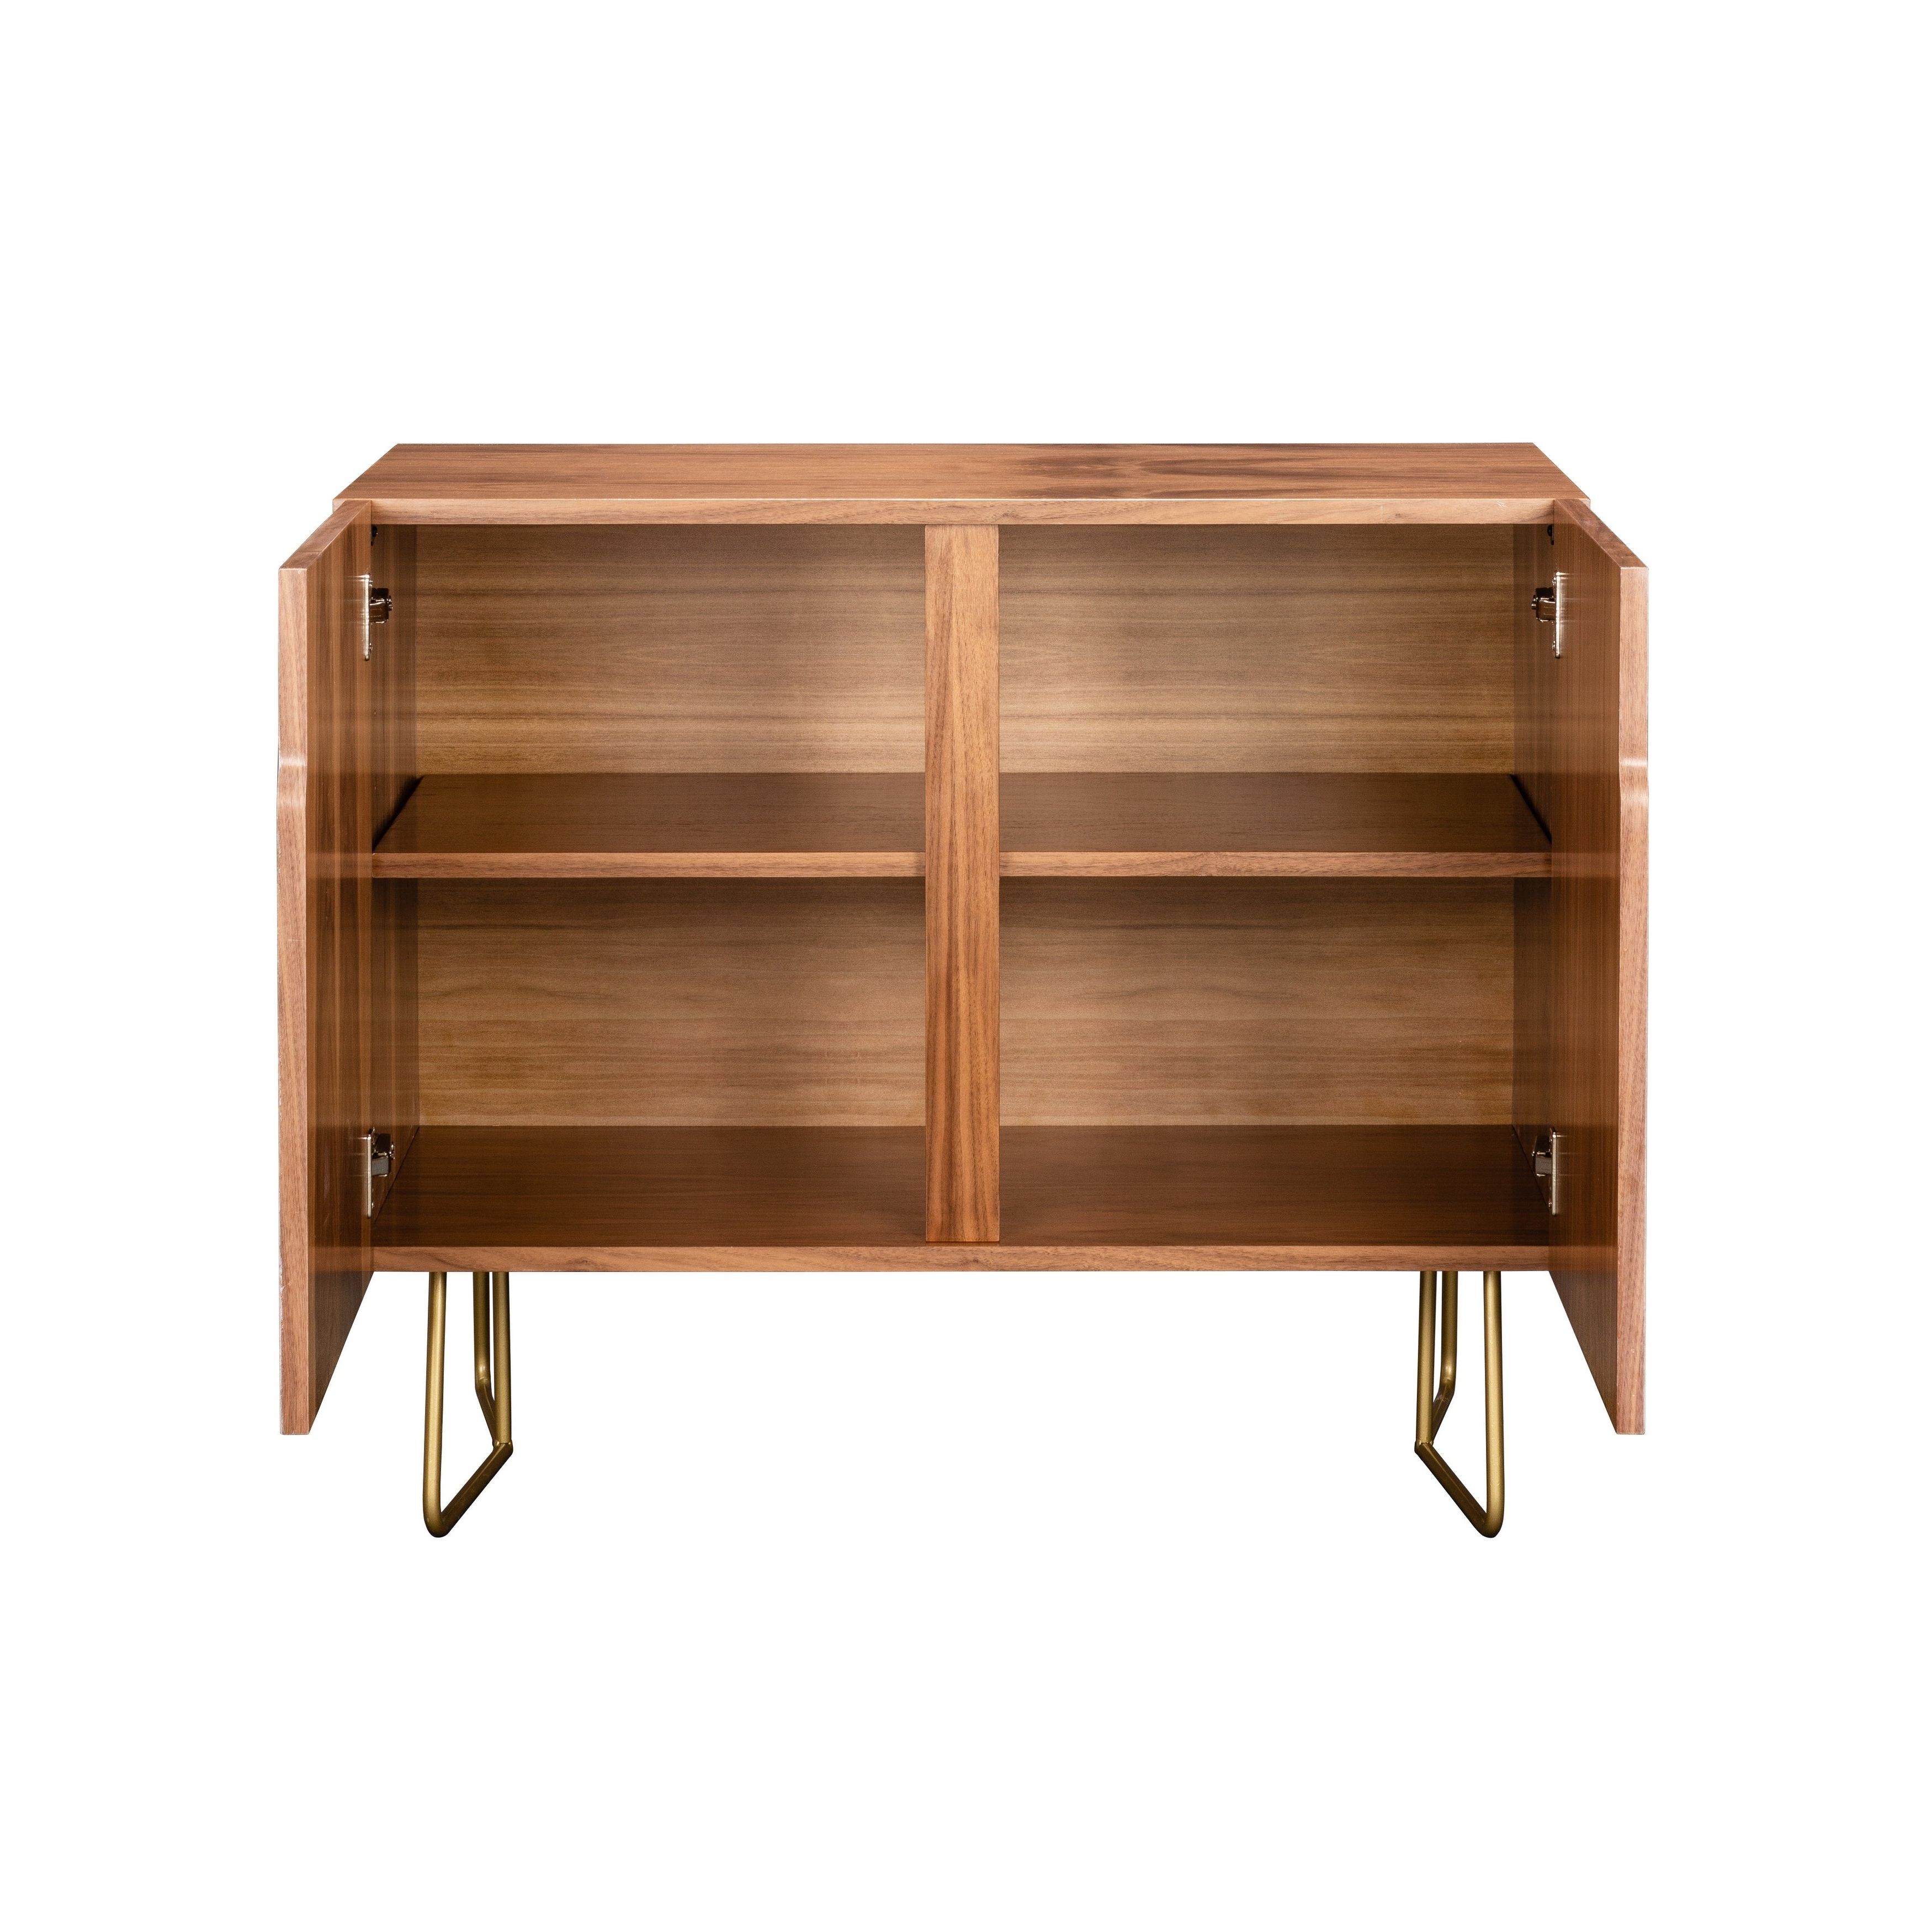 Deny Designs Pale Pink Bulbs Credenza (birch Or Walnut, 2 Leg Options) Regarding Pale Pink Bulbs Credenzas (View 10 of 20)